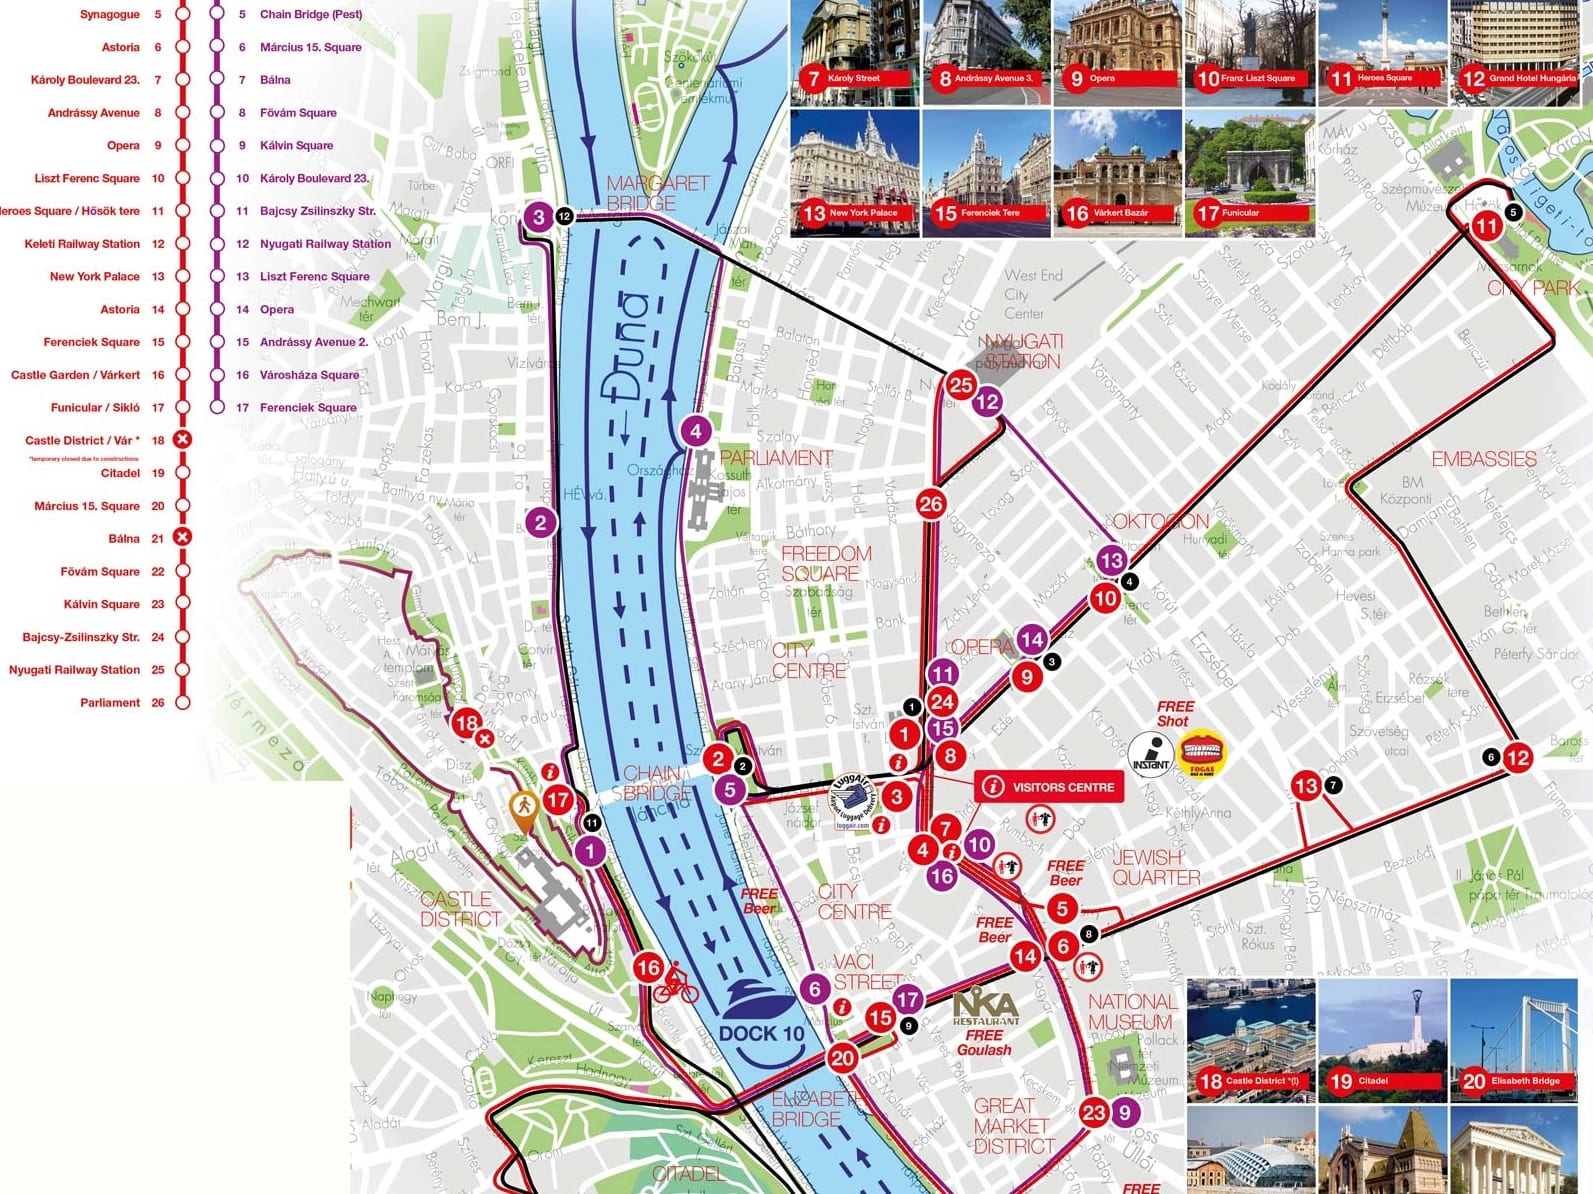 walking tour map of budapest